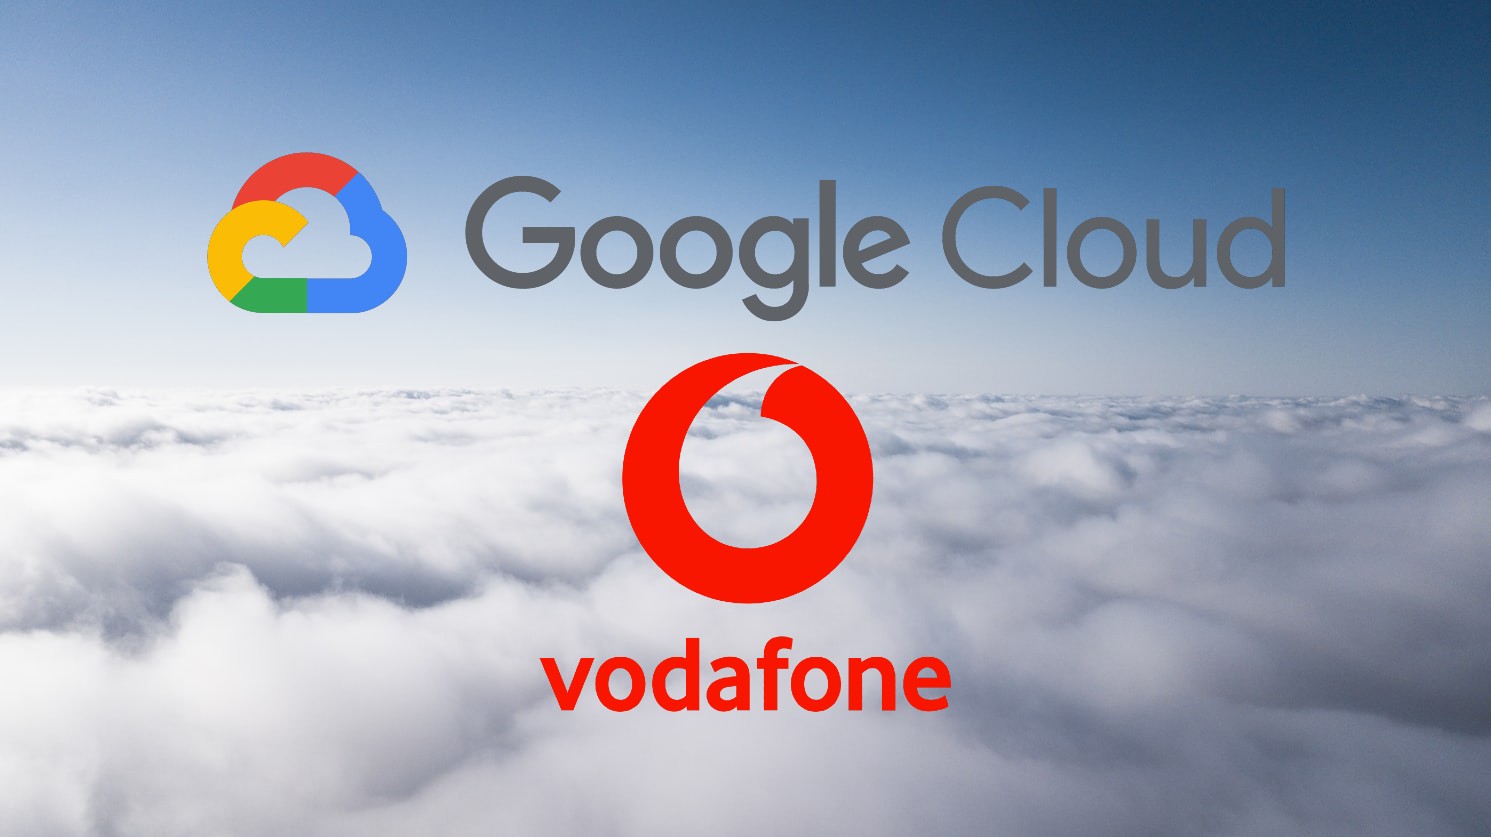 Vodafone and Google Cloud logos on a cloud background